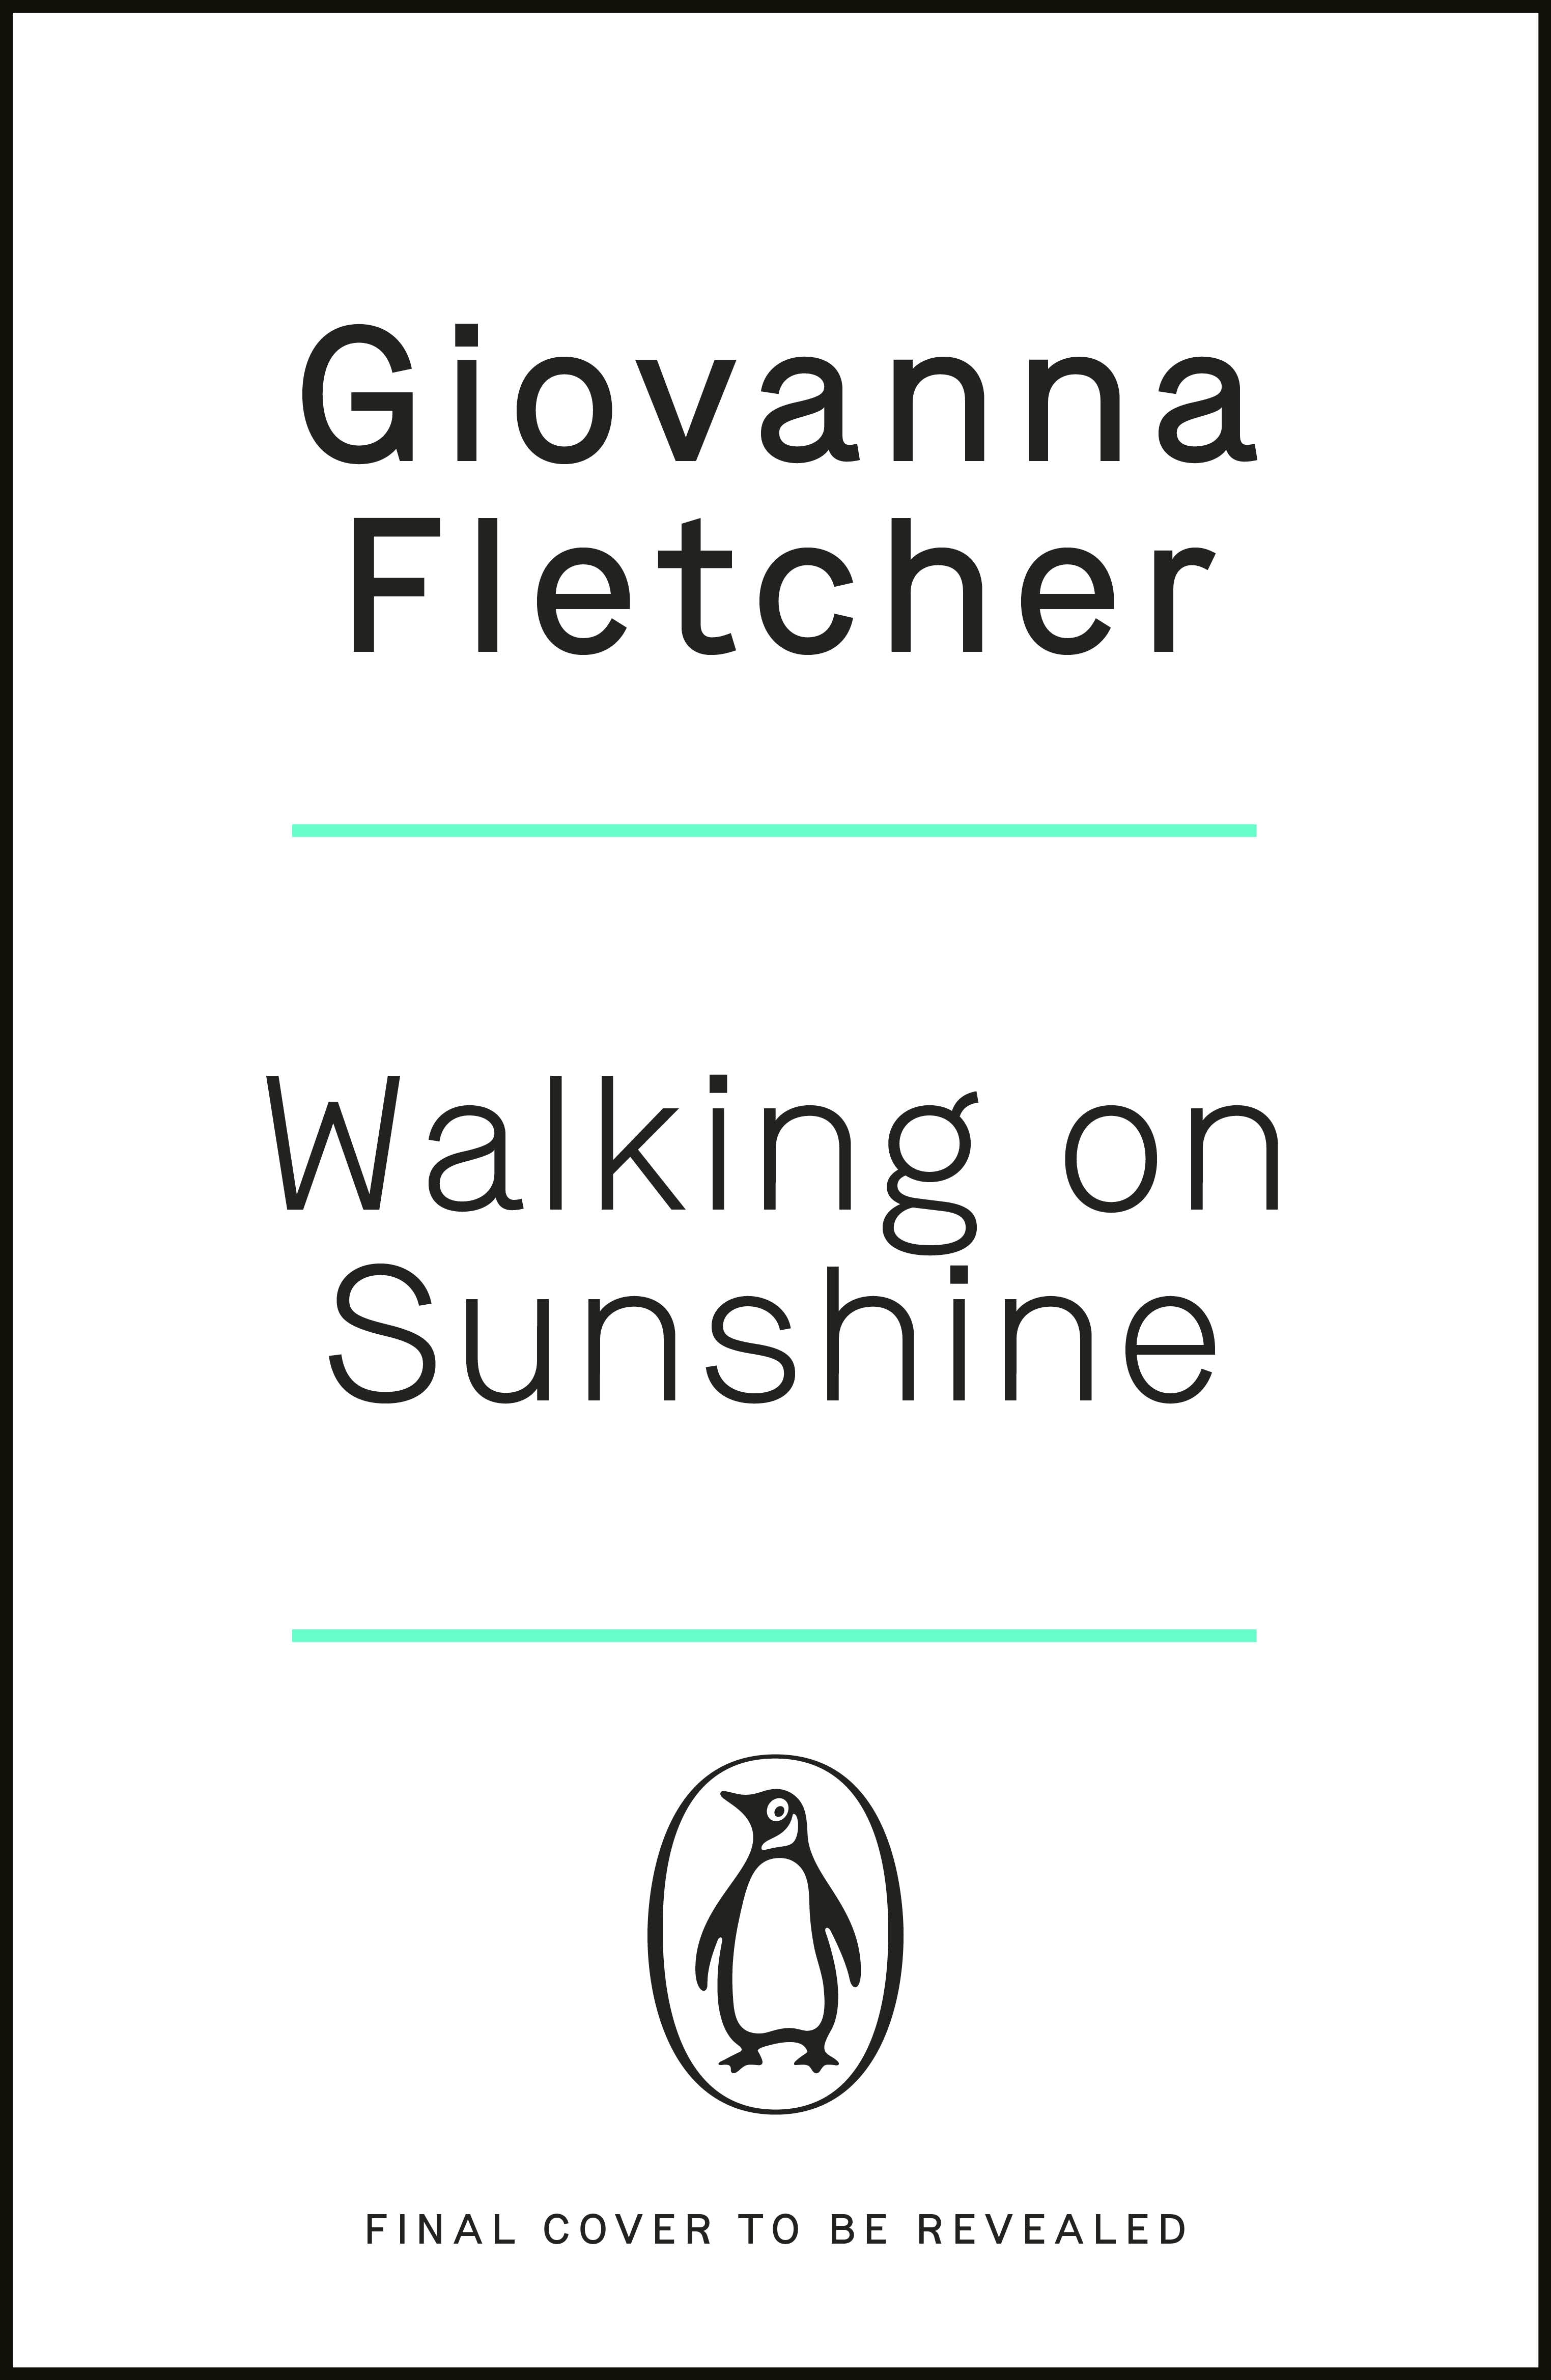 Book “Walking on Sunshine” by Giovanna Fletcher — May 26, 2022